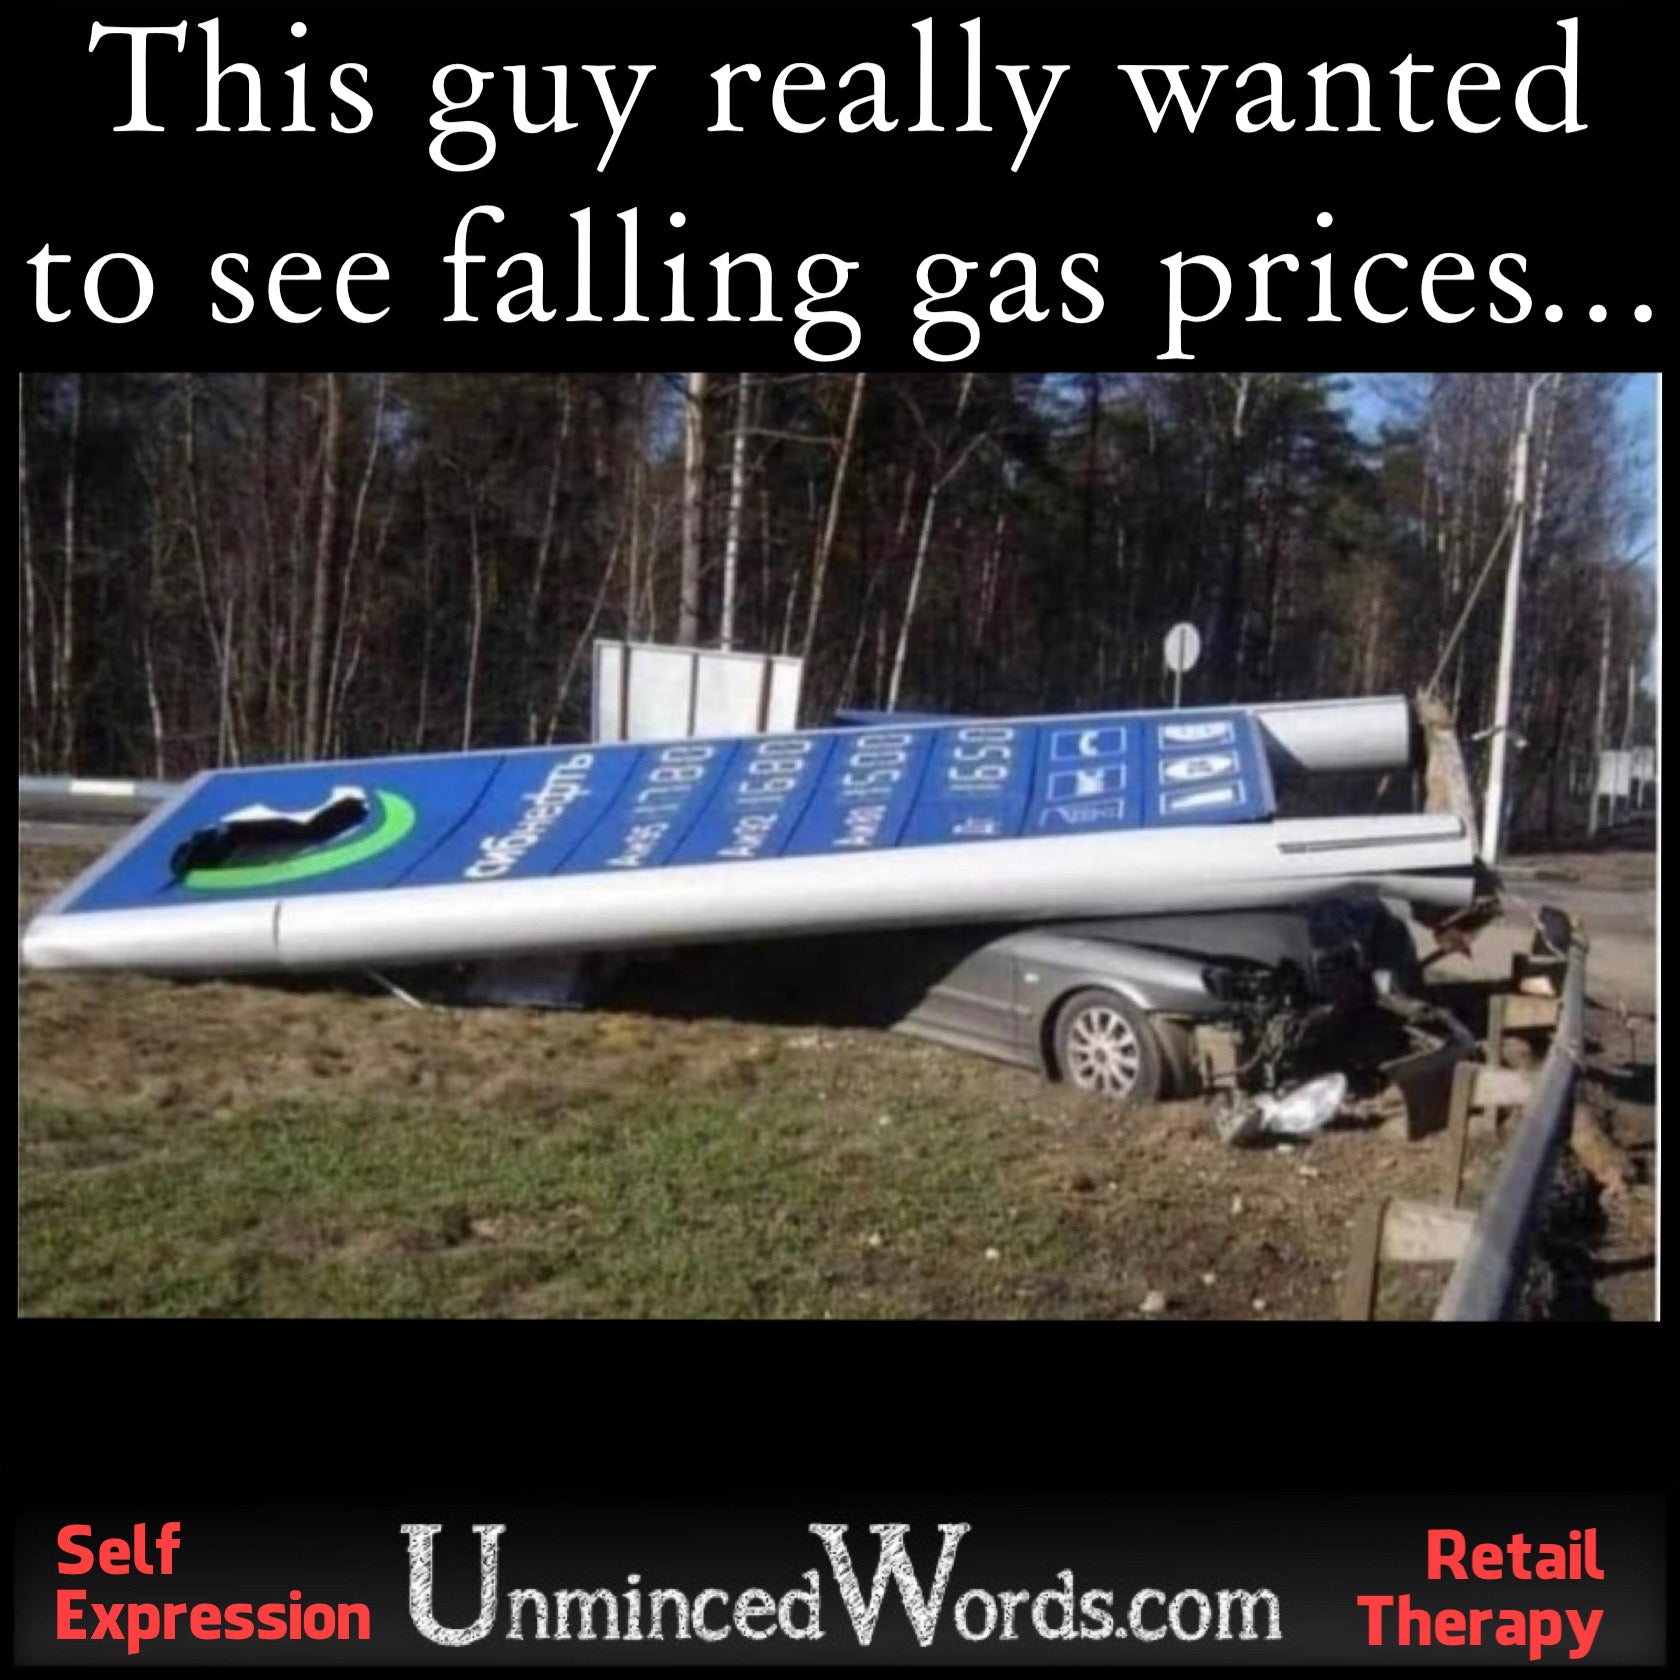 This guy really wanted to see falling gas prices